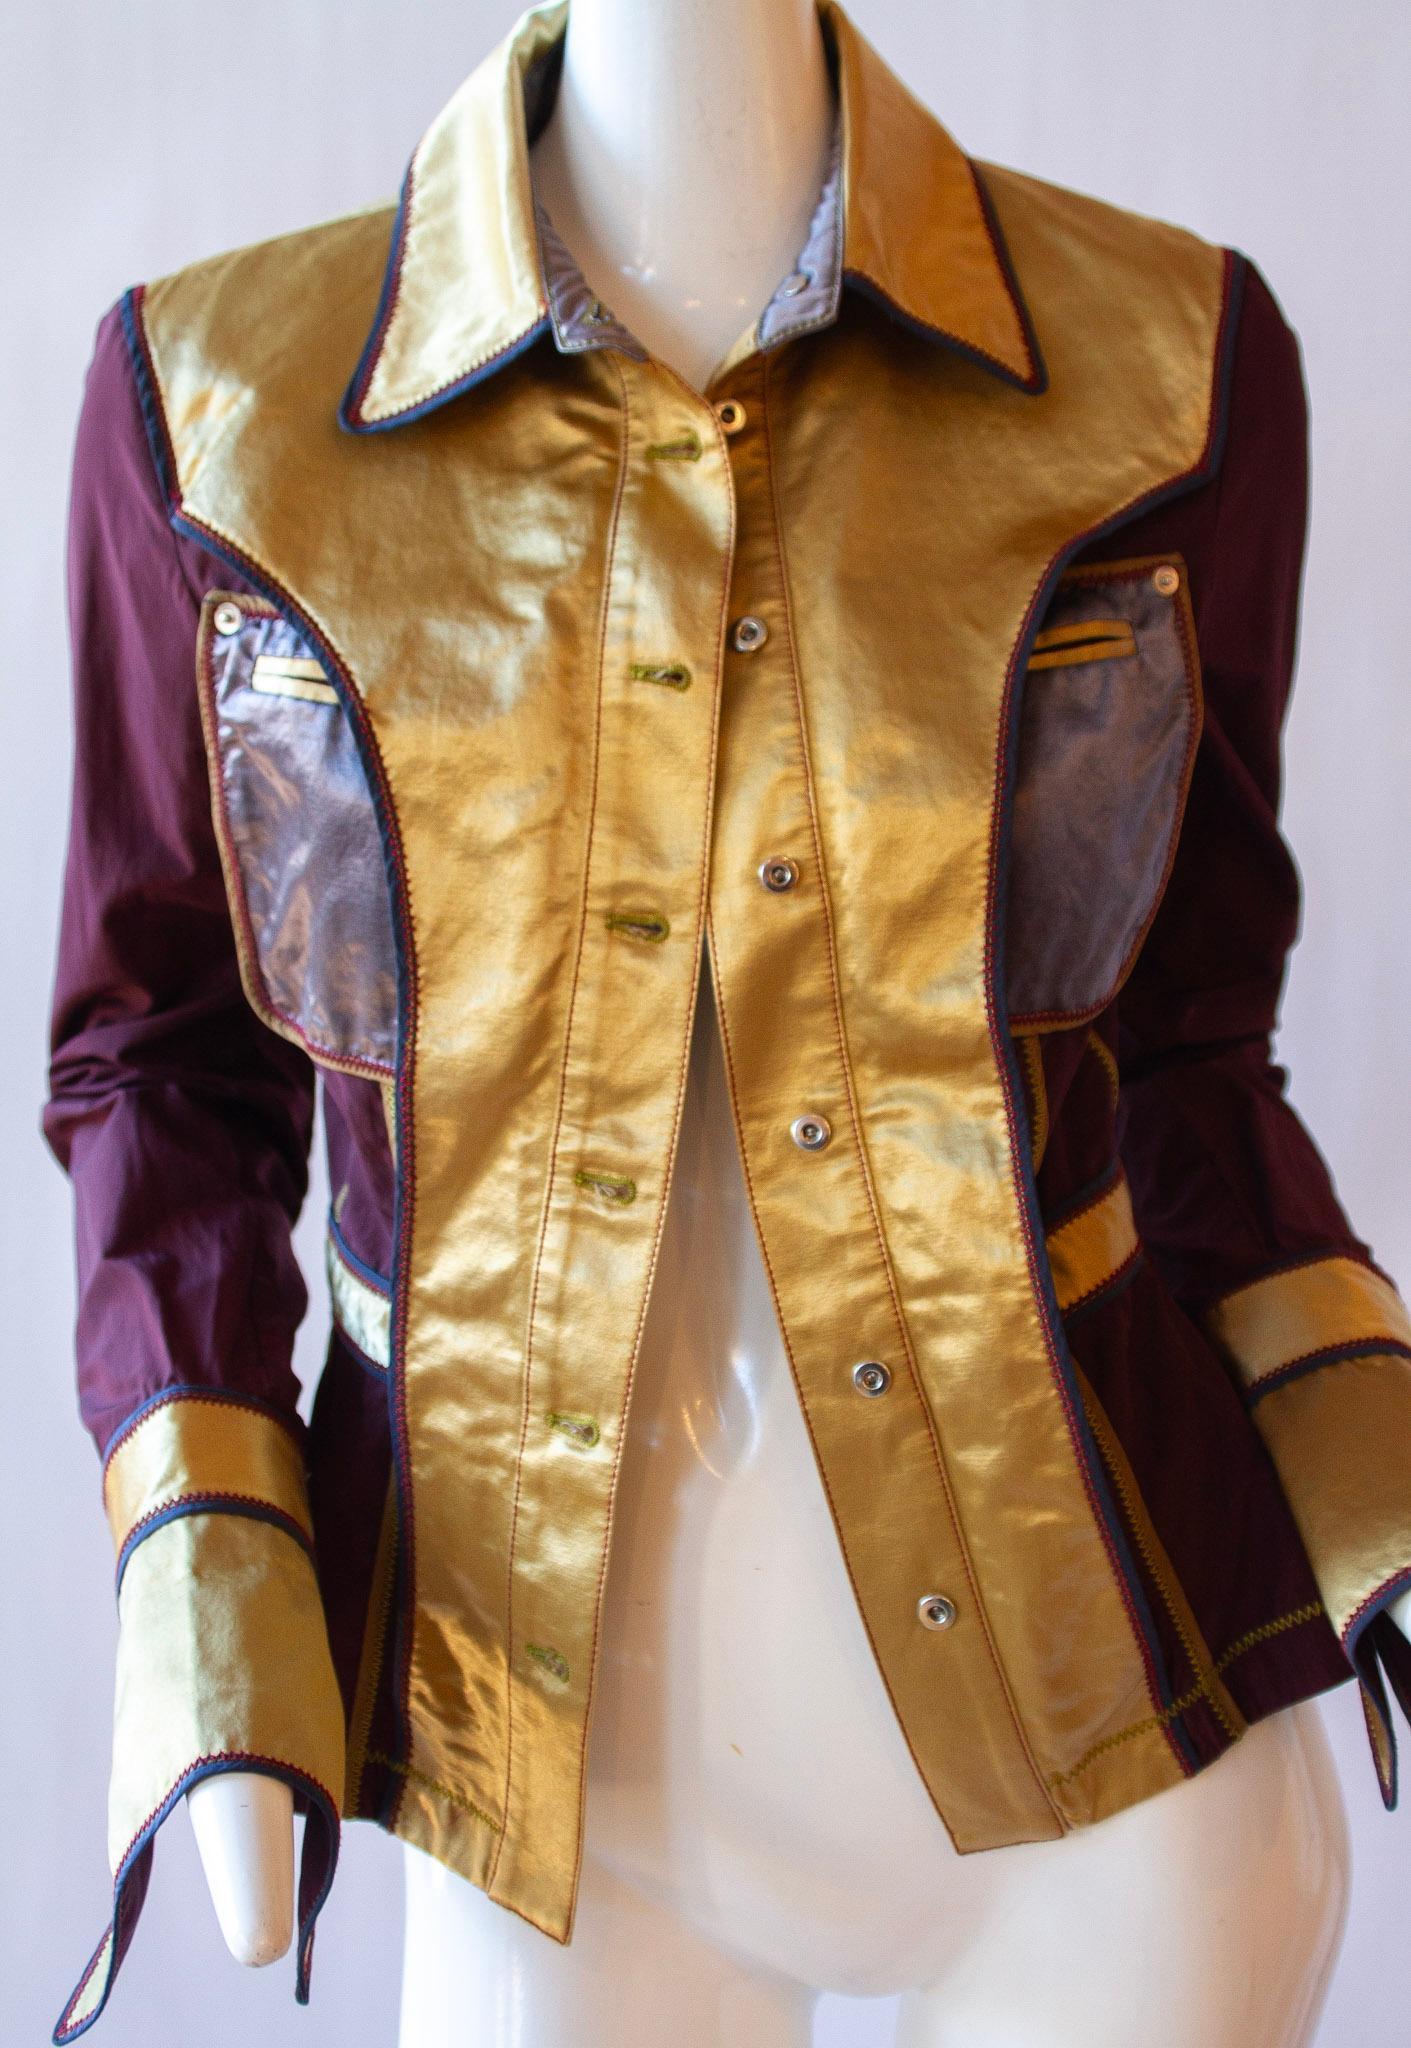 This Gianfranco Ferre jacket combines a metallic maroon pattern with rivet detailing on the elbow pads for an eye-catching, fashion-forward look. Genuine Italian craftsmanship and top tier quality fabric ensure a premium feel.